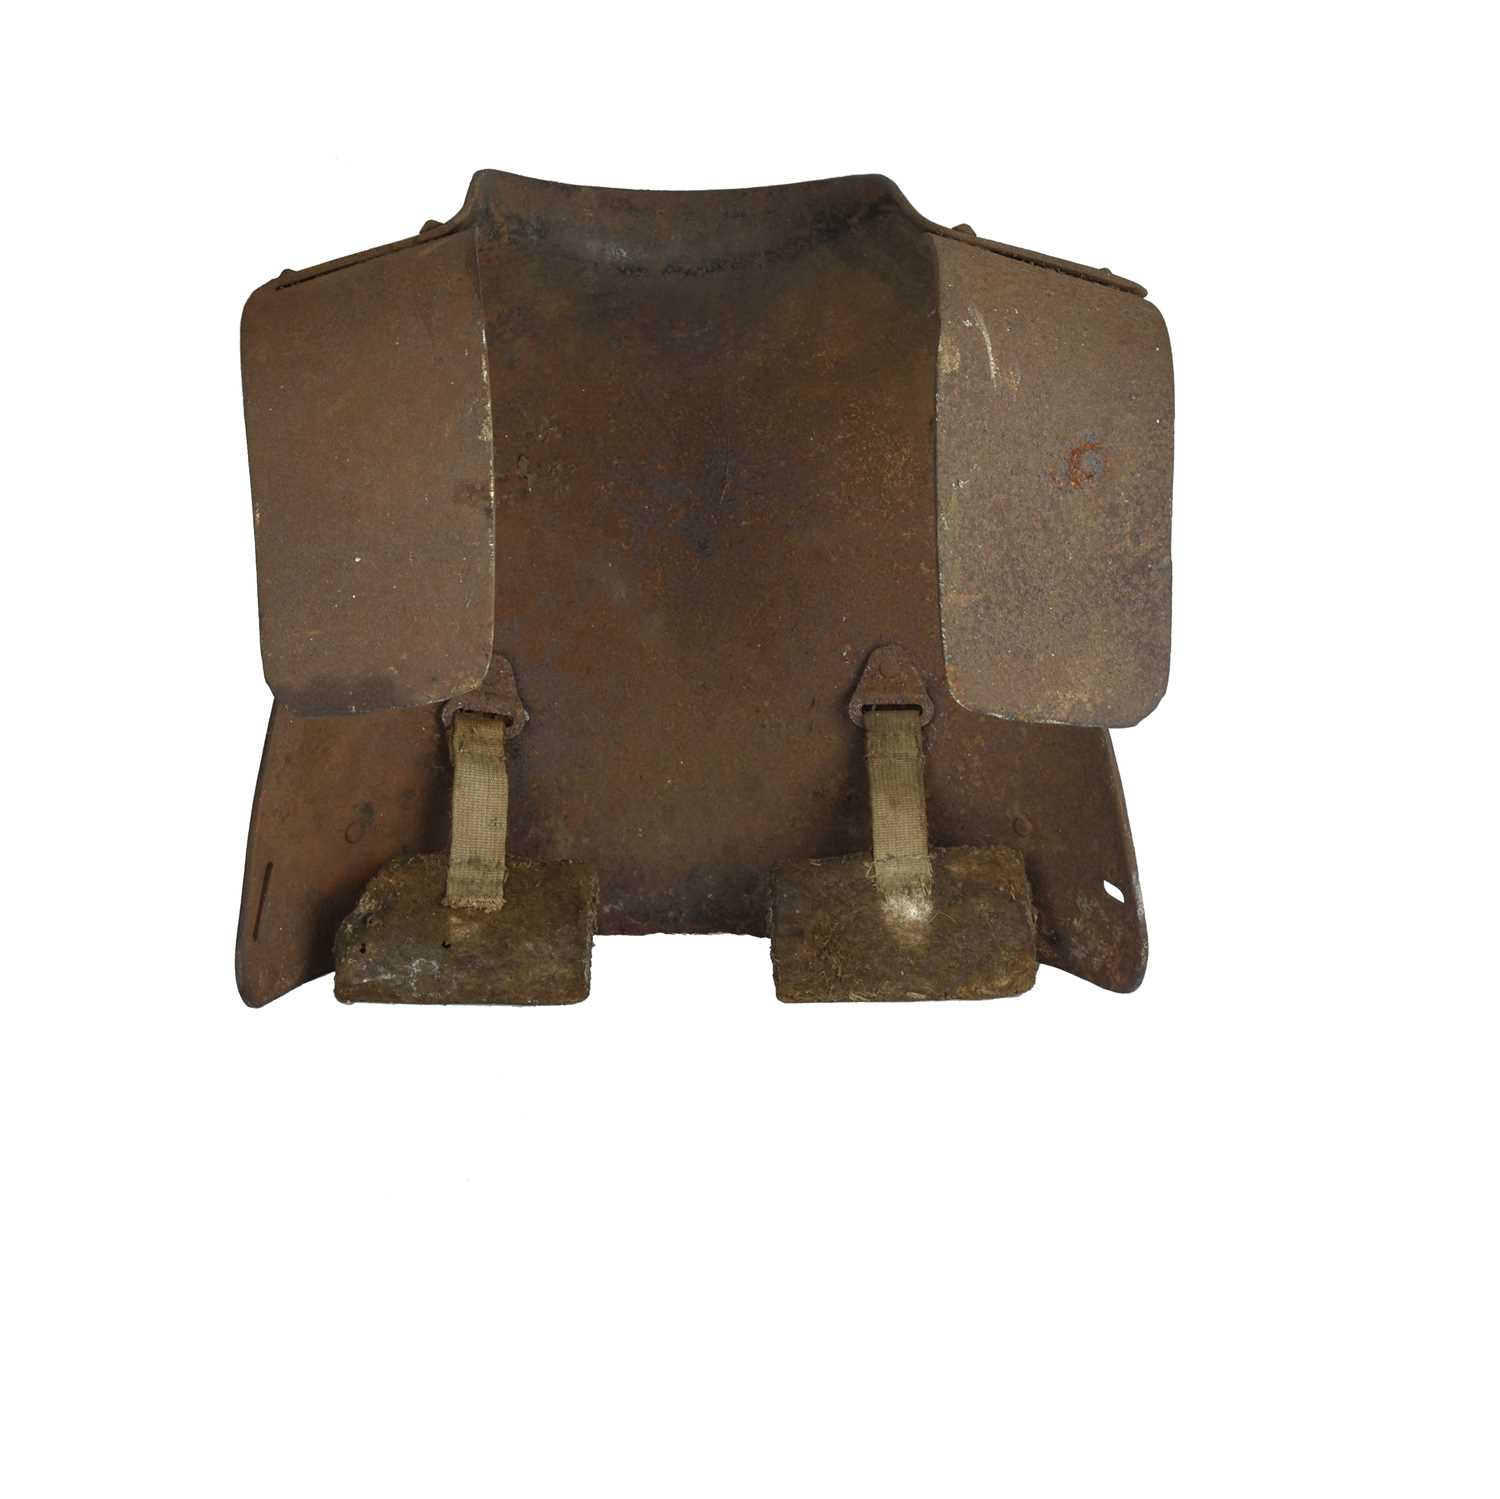 A Great War German sniper's breastplate, with rifle butt retention flange, and the straps and pads - Image 2 of 2